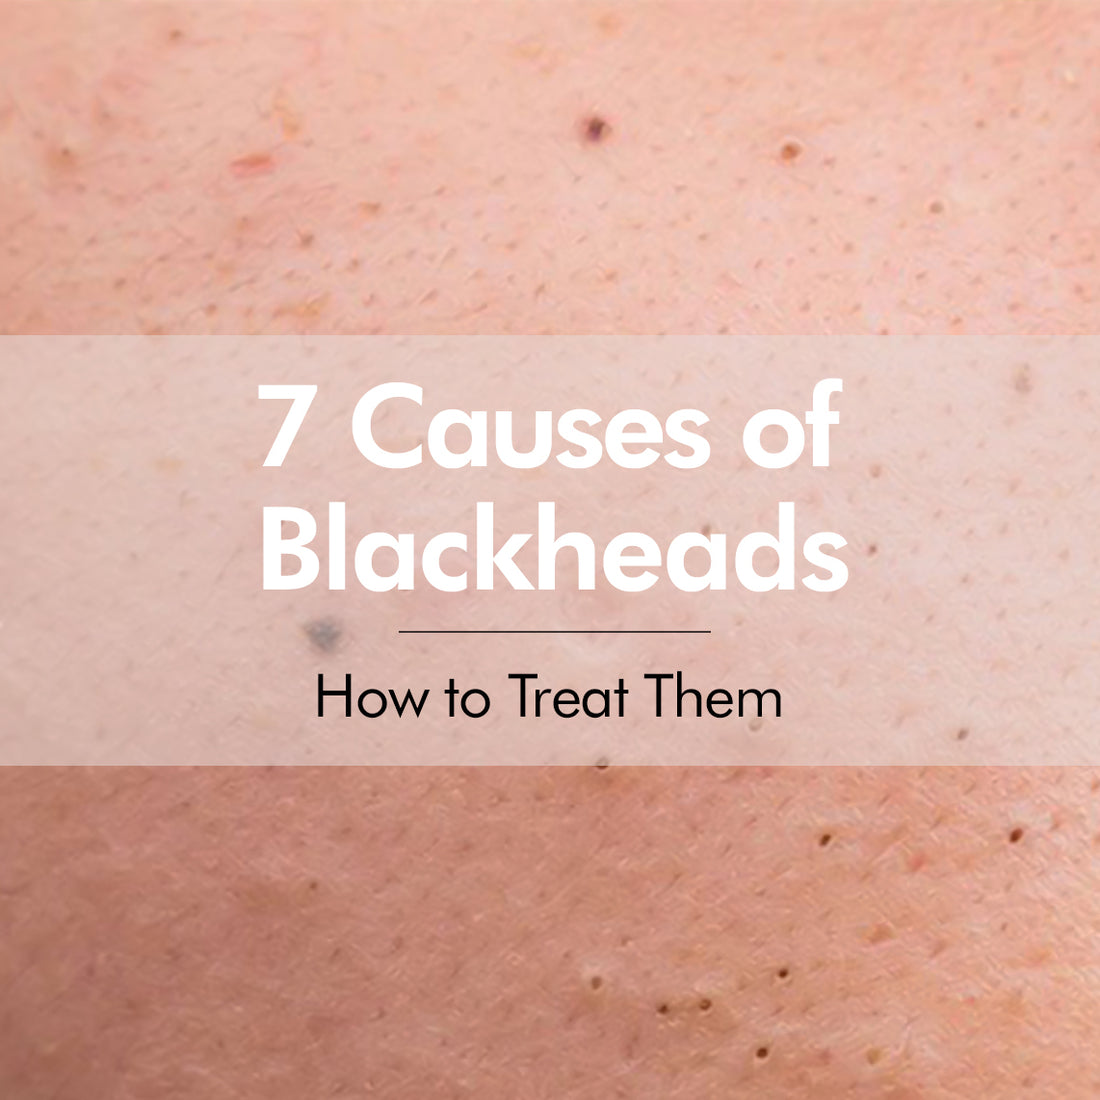 7 Causes of Blackheads & How to Treat Them